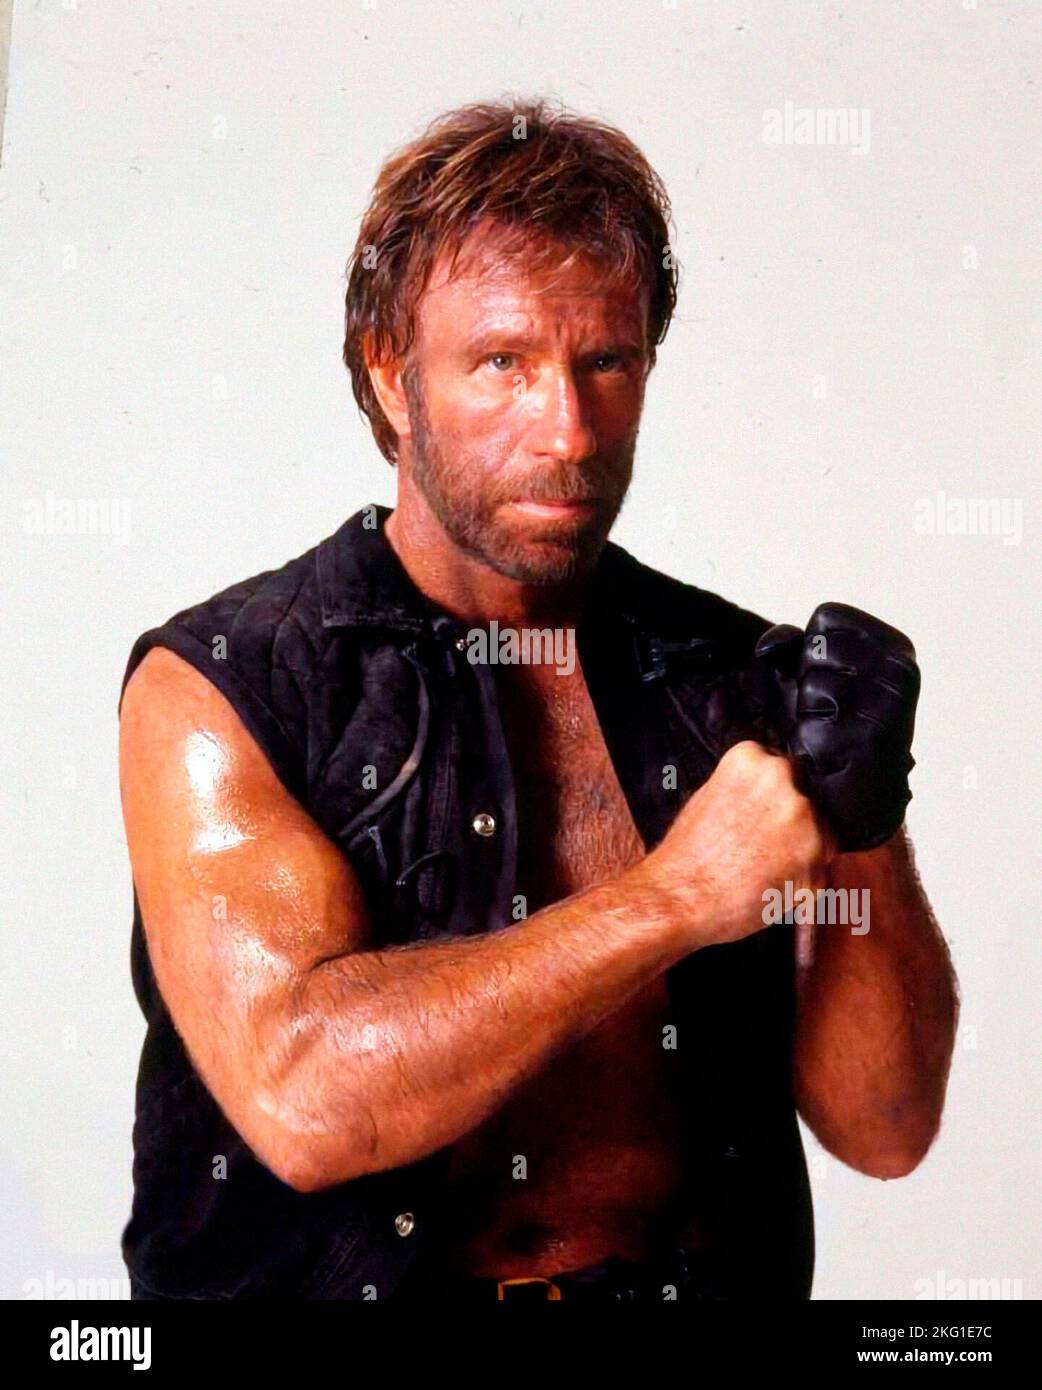 CHUCK NORRIS in THE DELTA FORCE (1986), directed by MENAHEM GOLAN. Credit: CANNON FILMS / Album Stock Photo